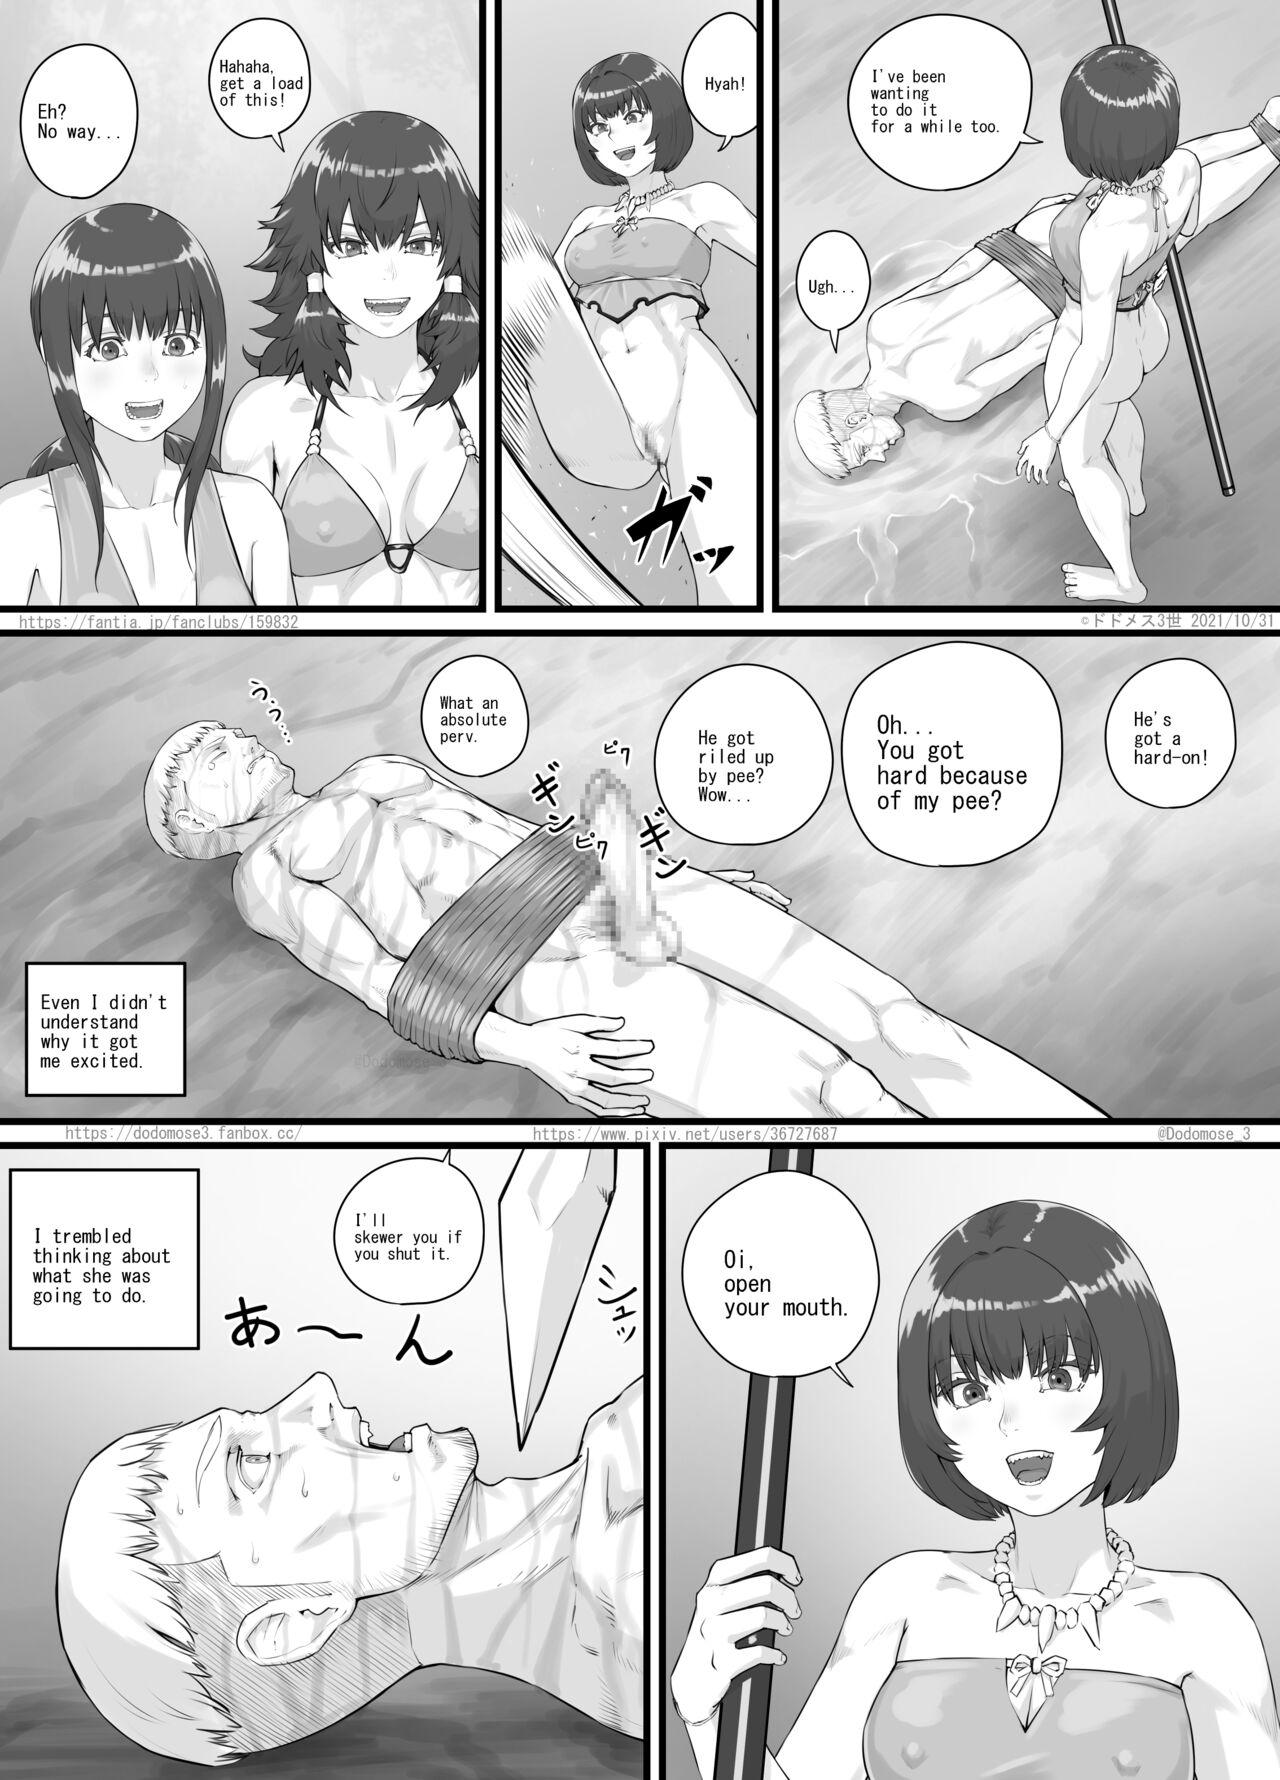 Best Blowjob アマゾネス漫画（English Version） - Original Cosplay - Page 11